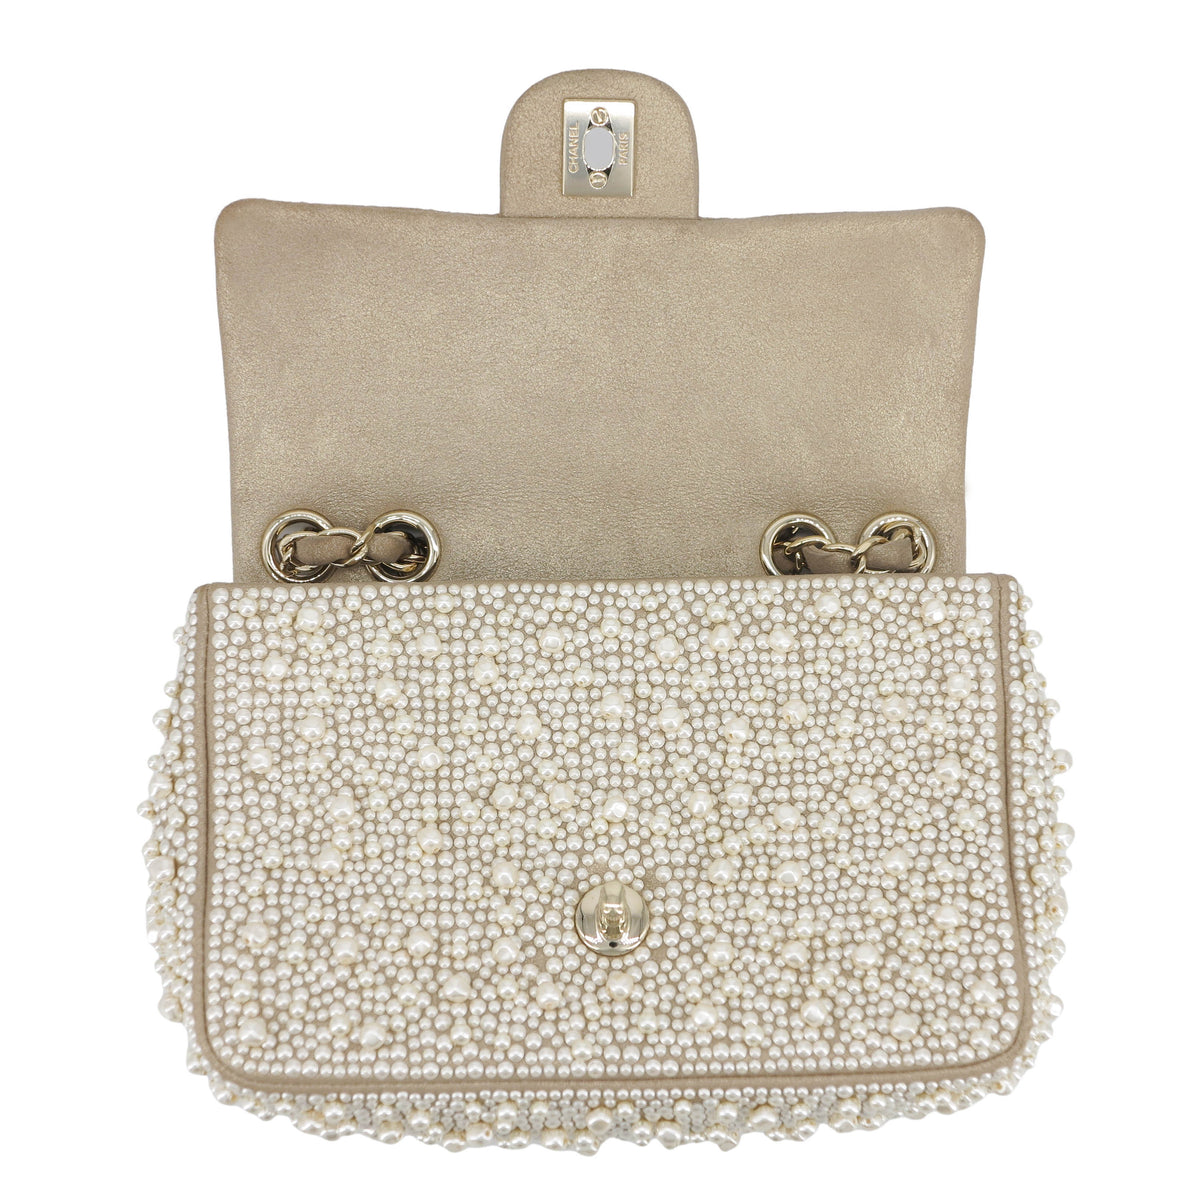 Shop 17A Ritz Pearl Mini Flap Bag CHANEL. Find the newest styles